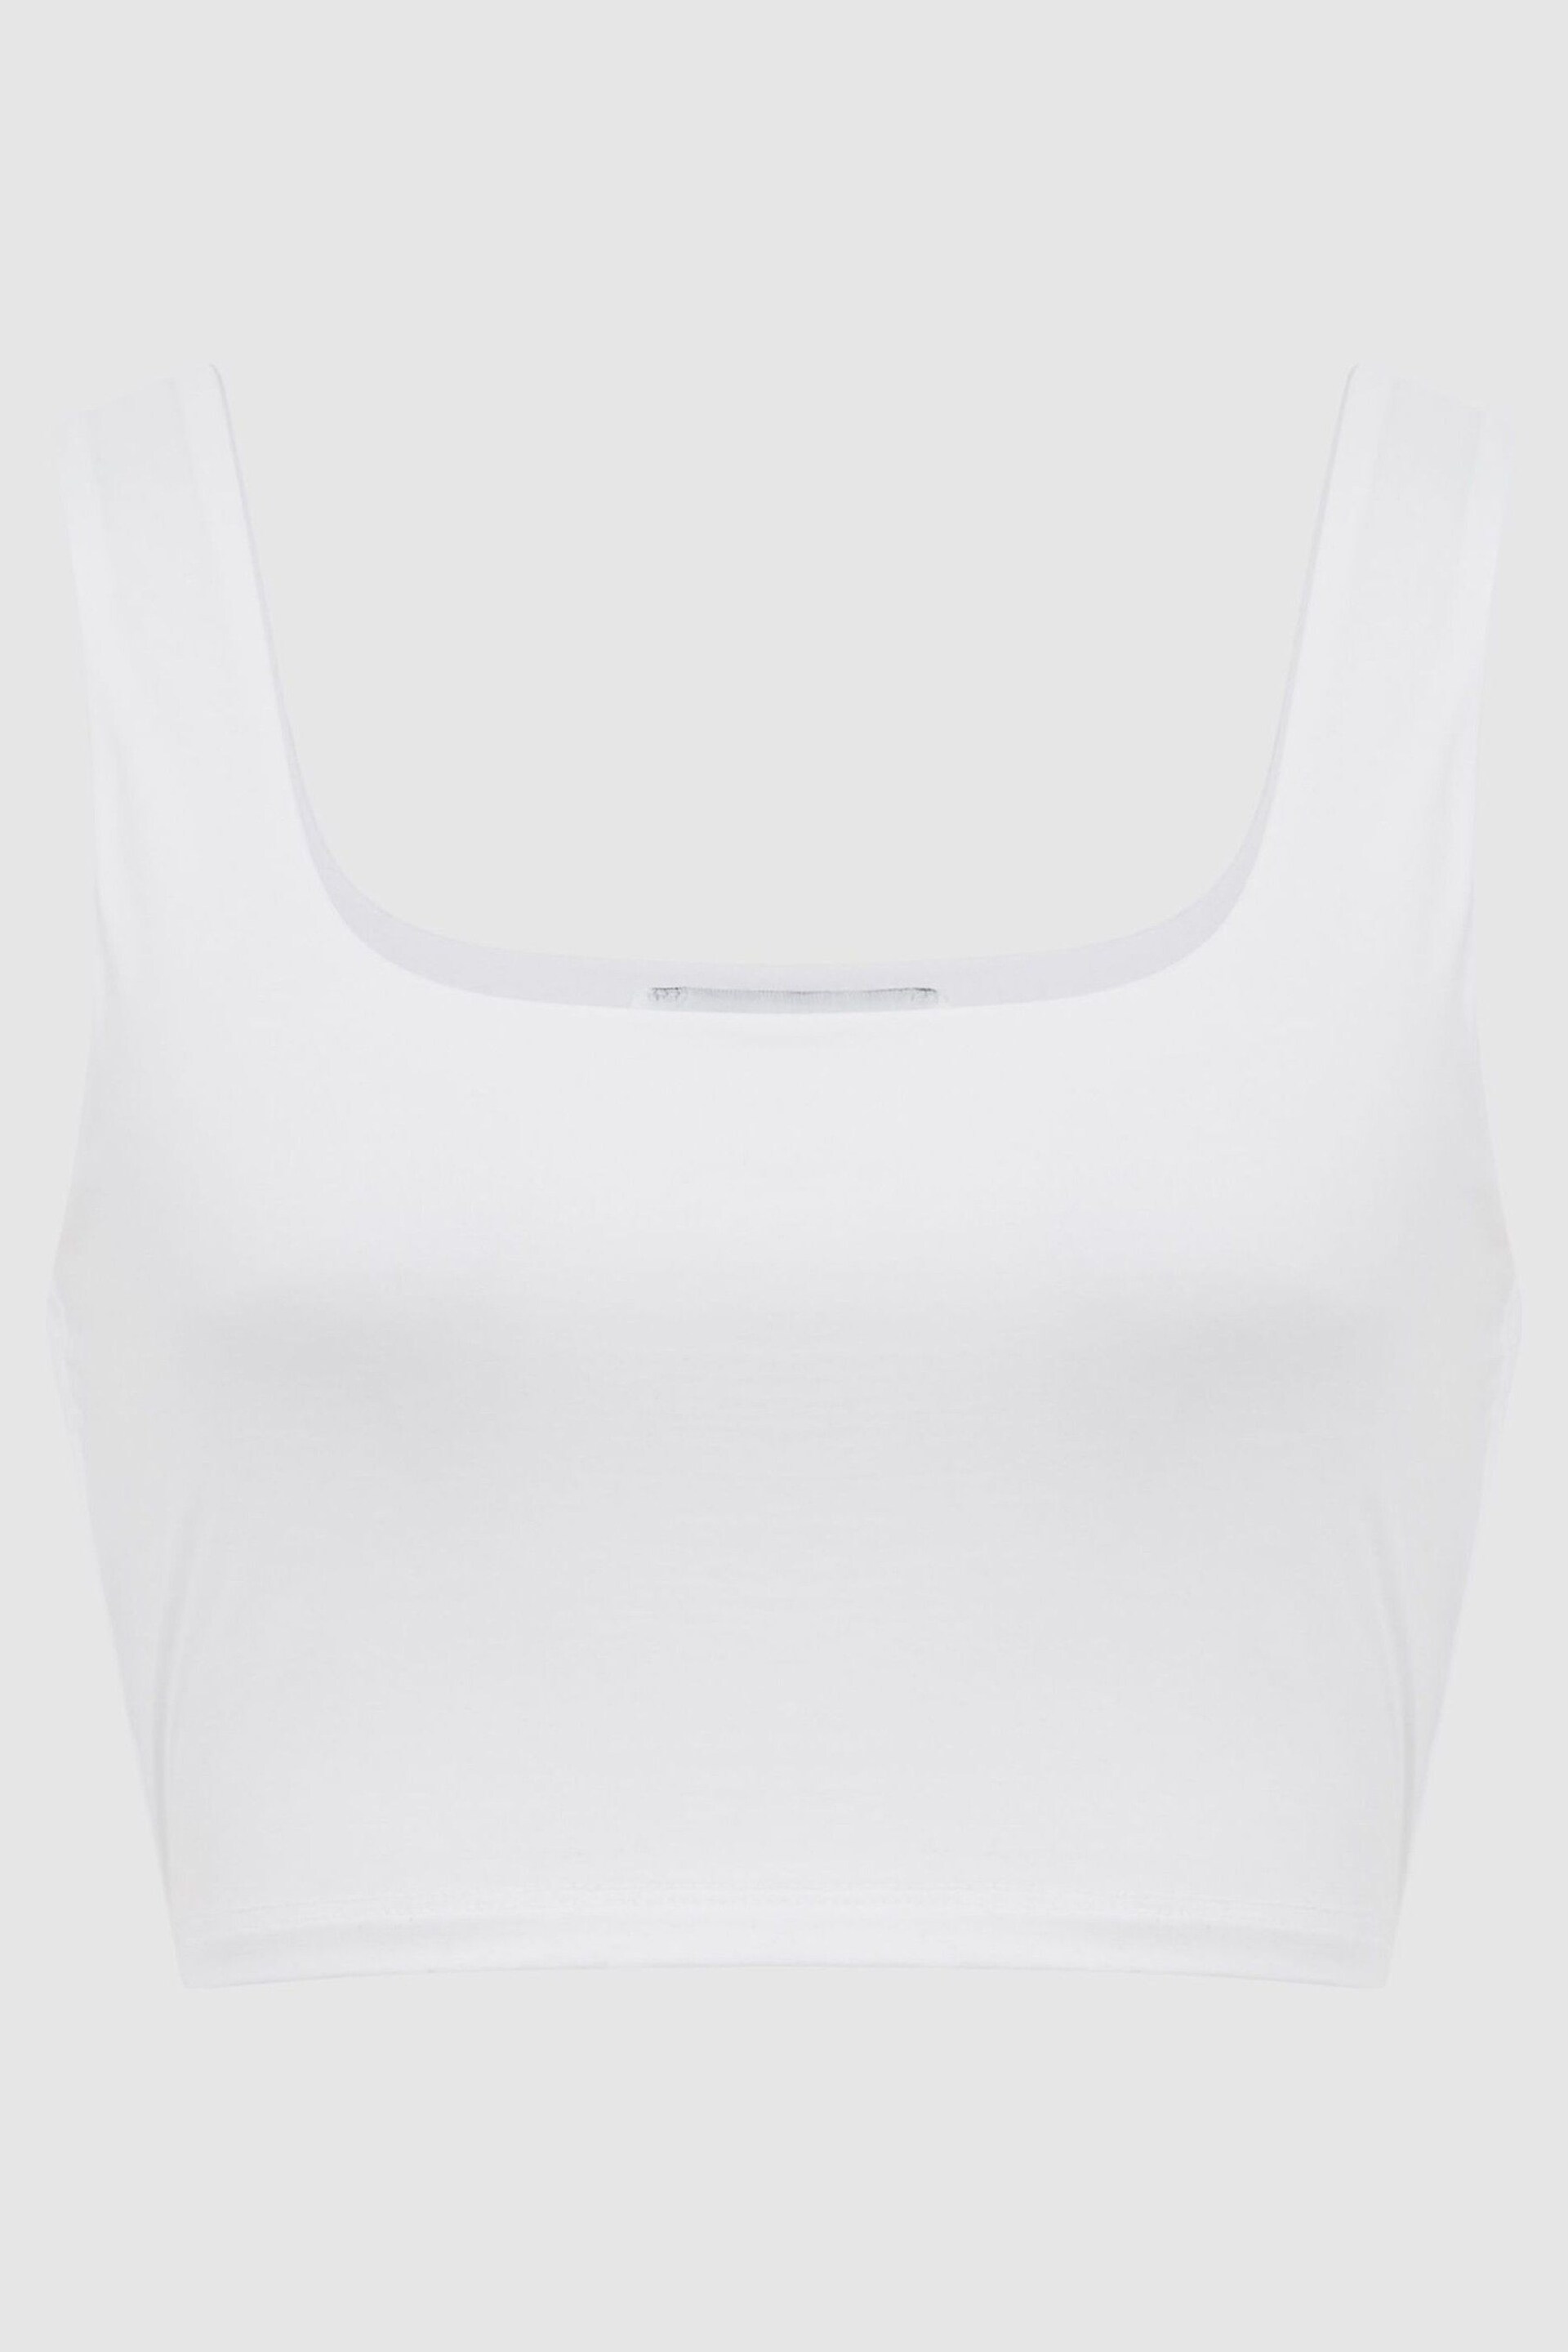 Reiss White Fae Square Neck Crop Top - Image 2 of 7